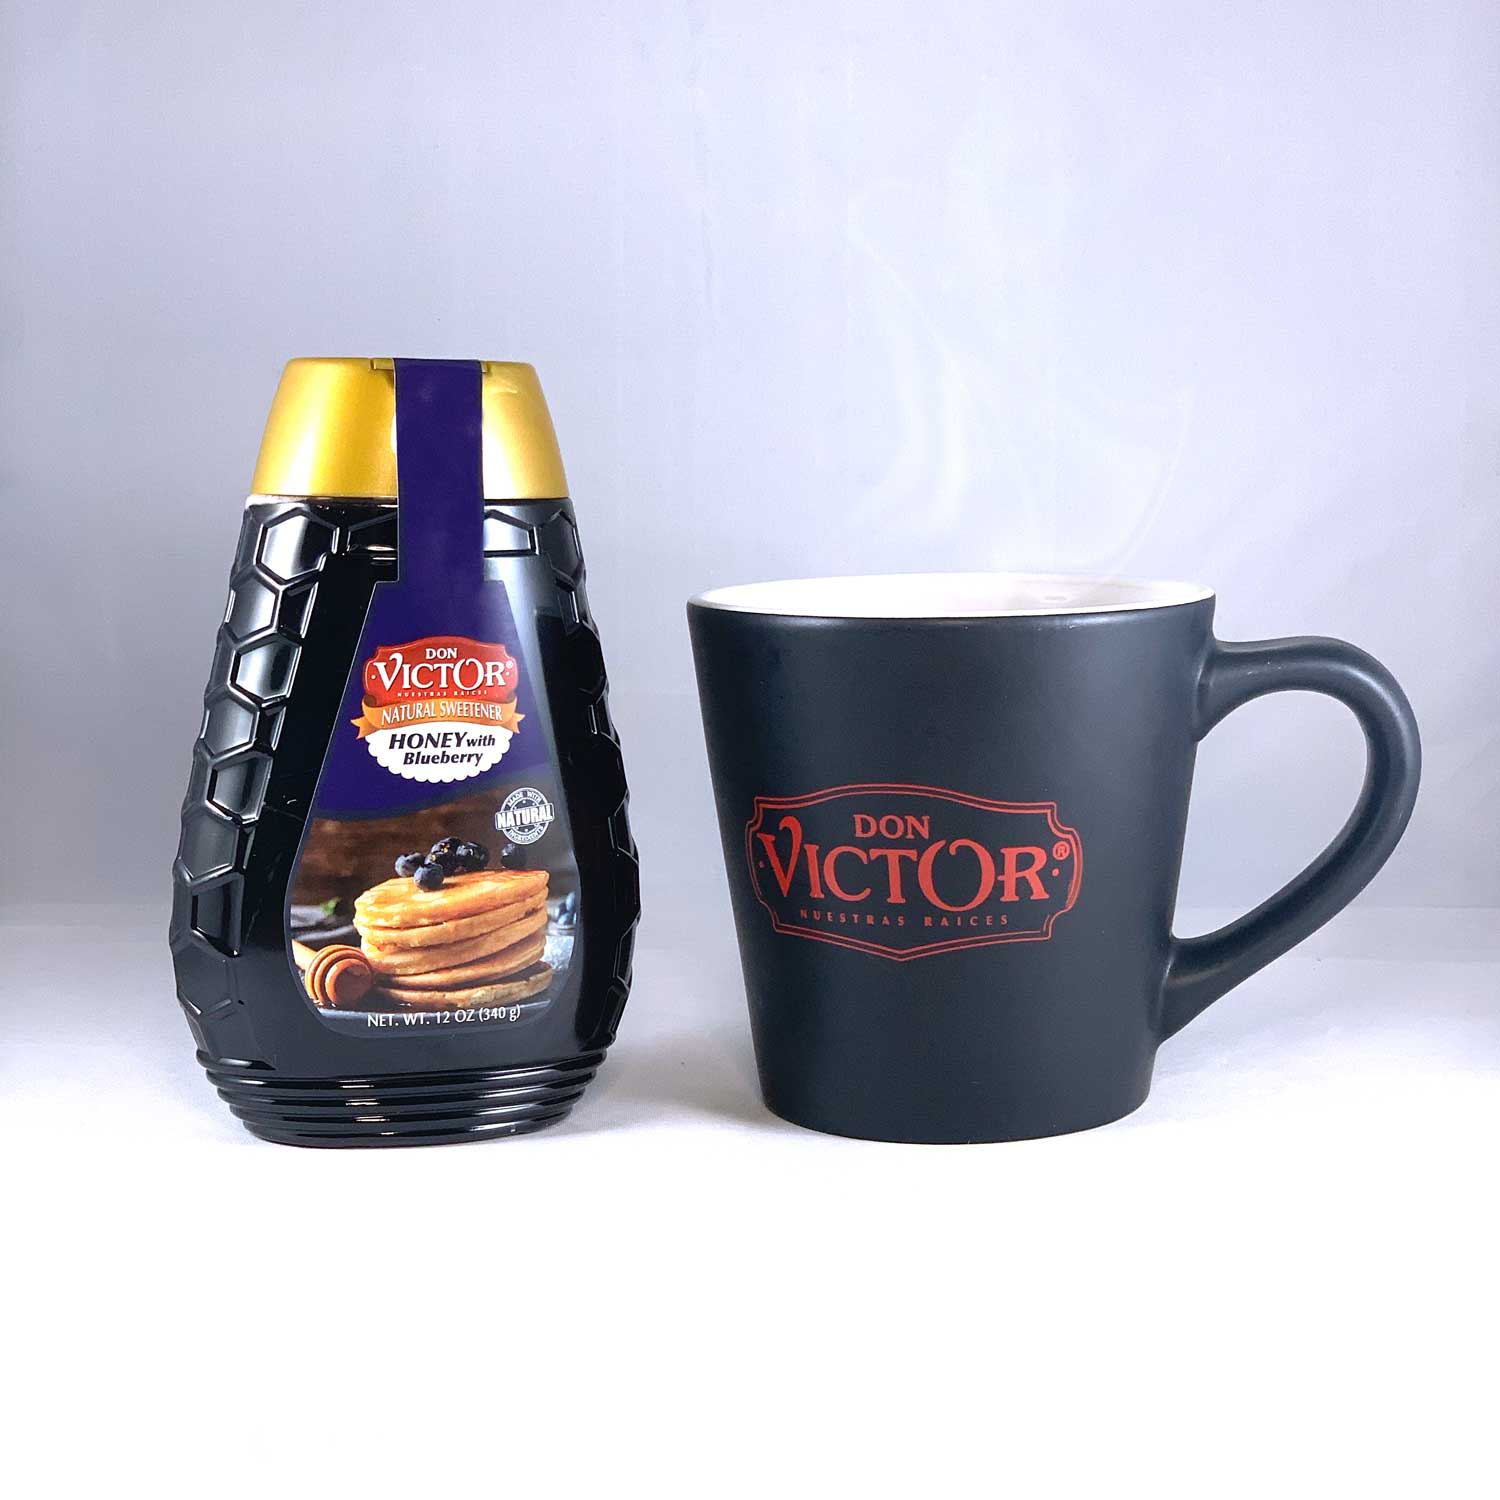 Bottle of Don Victor natural blueberry flavored honey beside a steaming mug of hot blueberry green tea with honey.